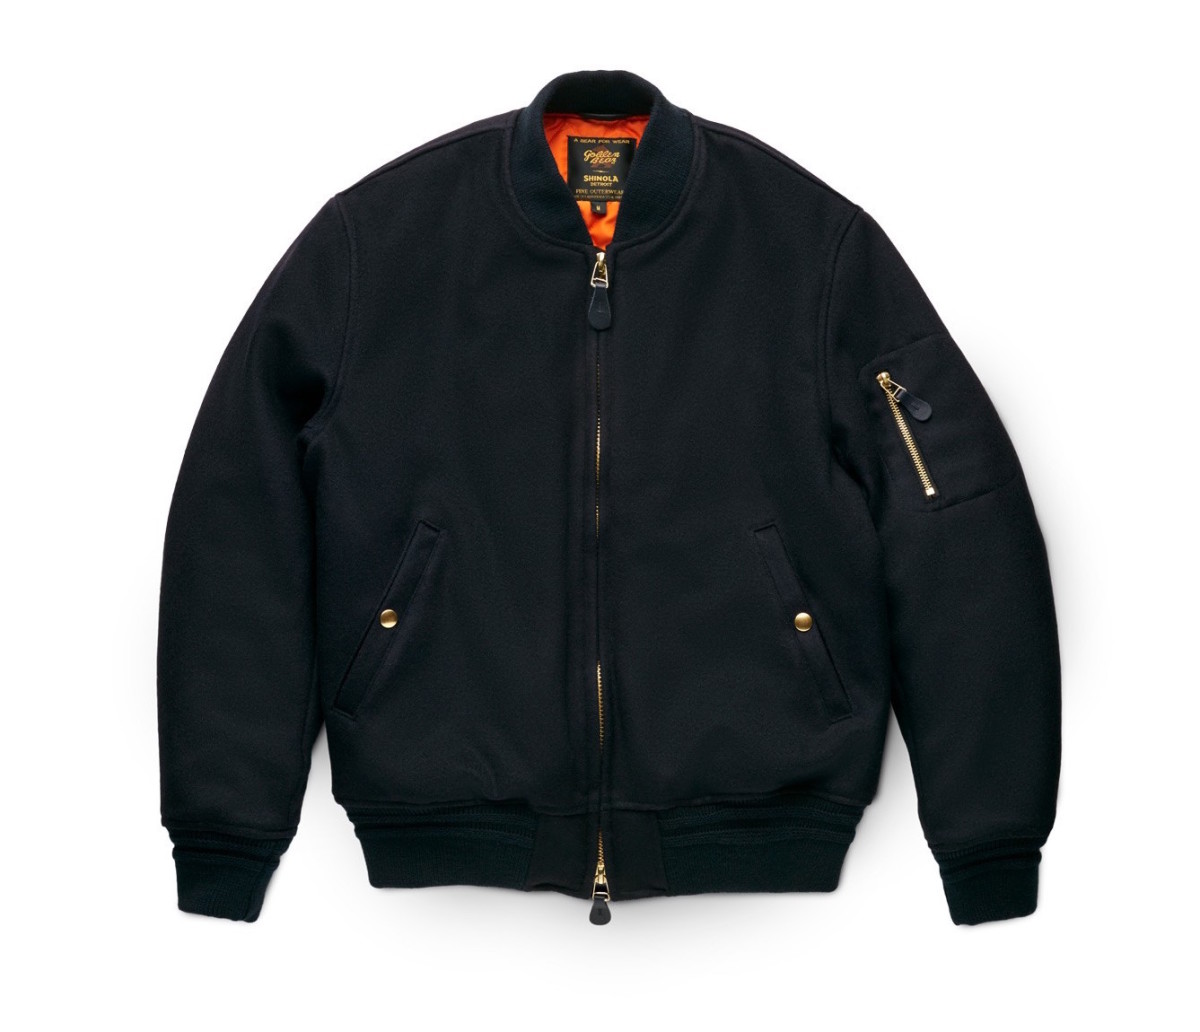 Shinola and Golden Bear's MA-1 is the perfect jacket for fall - Acquire